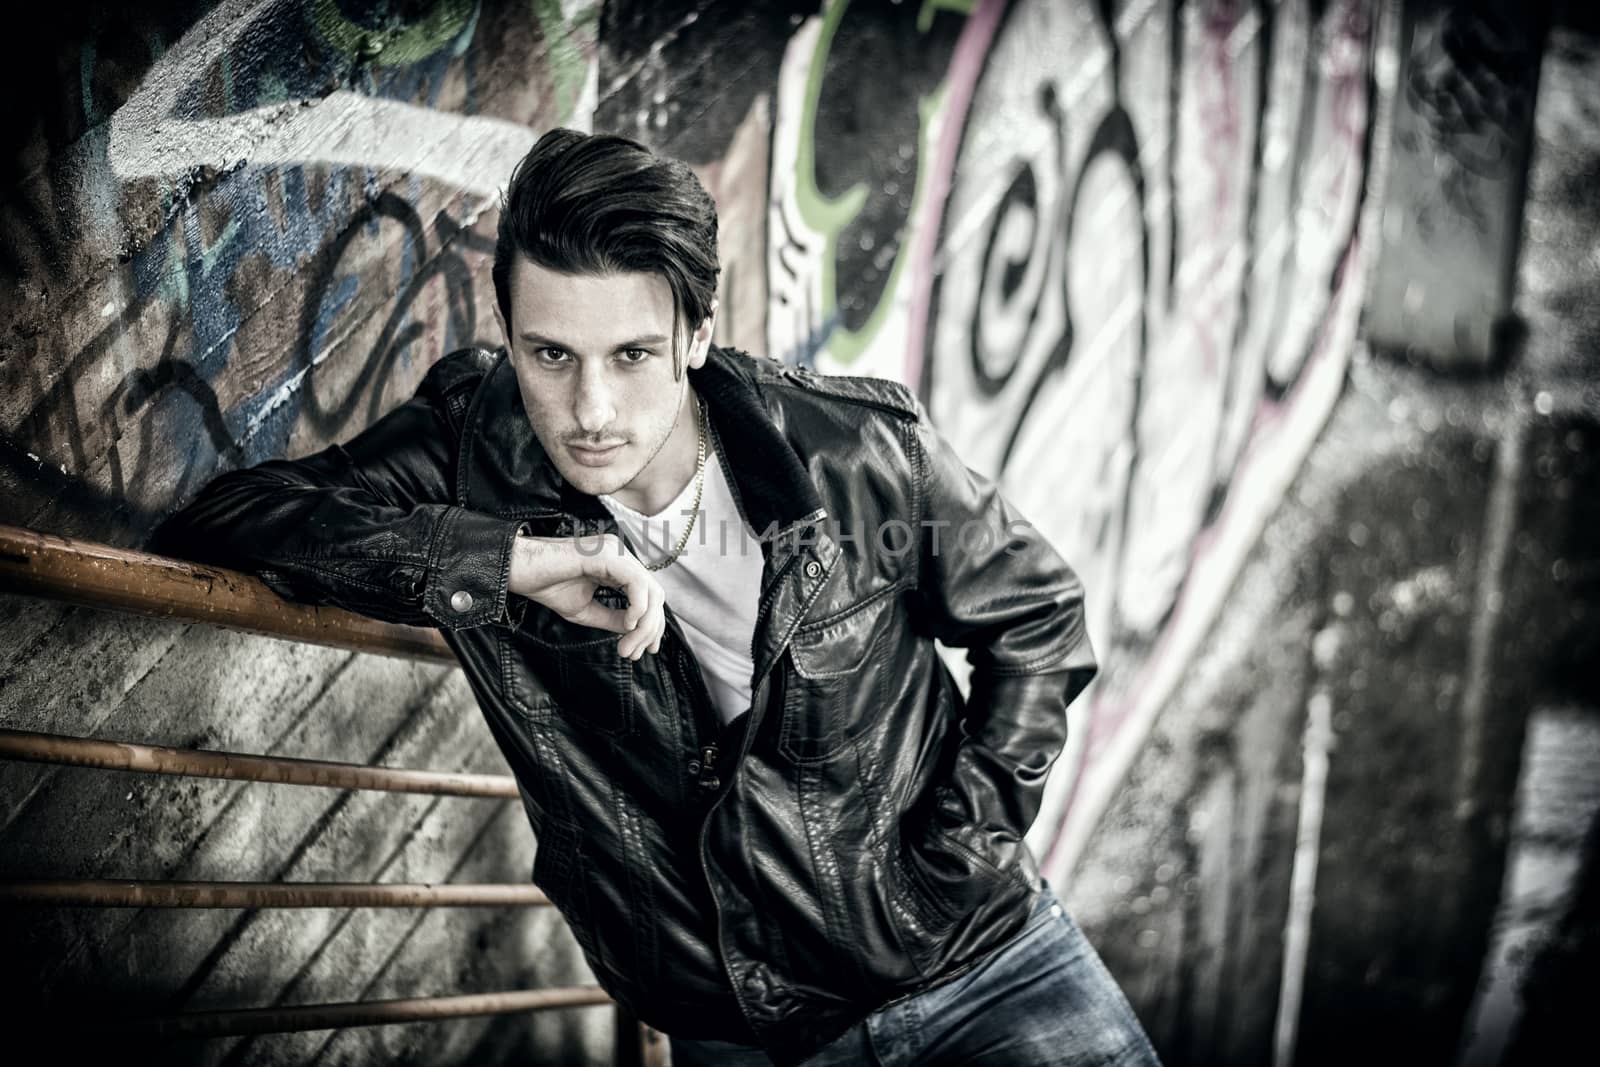 Handsome young man standing outdoors in urban environment on metal stairs, looking at camera